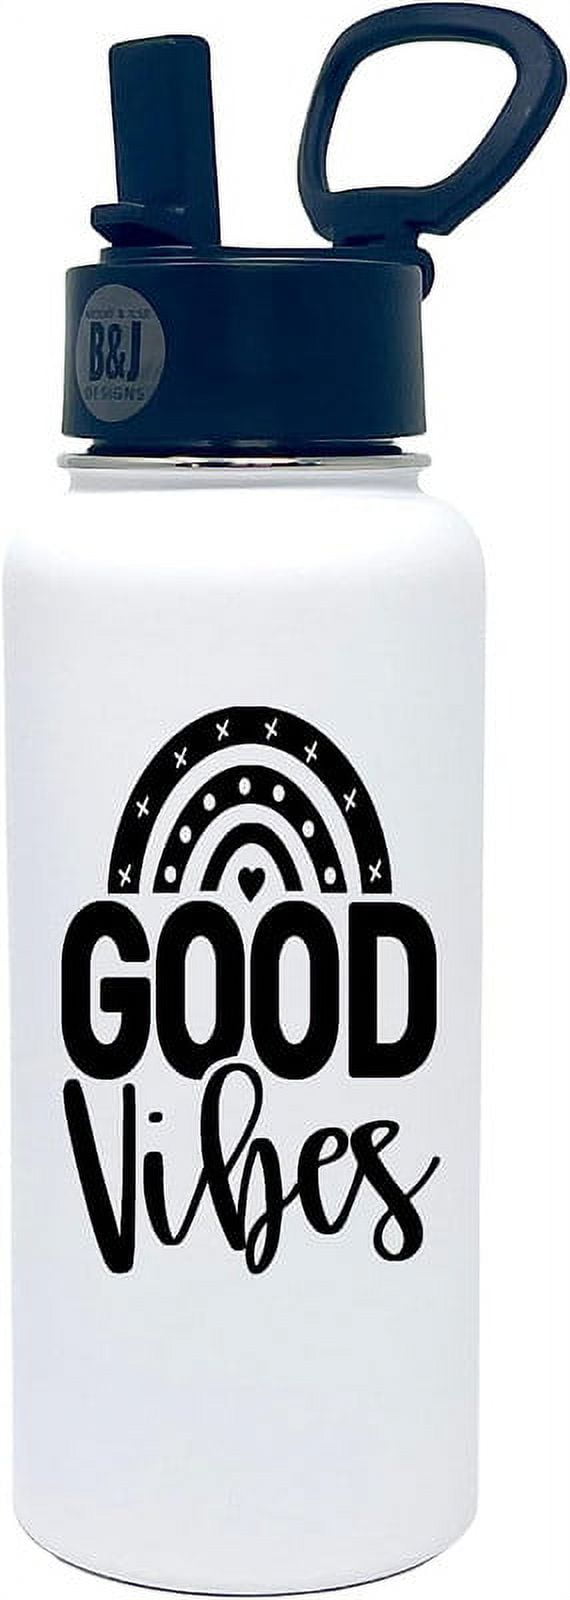 Gifts for Teenage Boys, Girls - Cool Good Vibes Water Bottle  with Straw - Funny Gift for Teenager, Tween, Boyfriend, College Guys,  Preteens, Tweens, Tech Gamers - Presents for Birthday